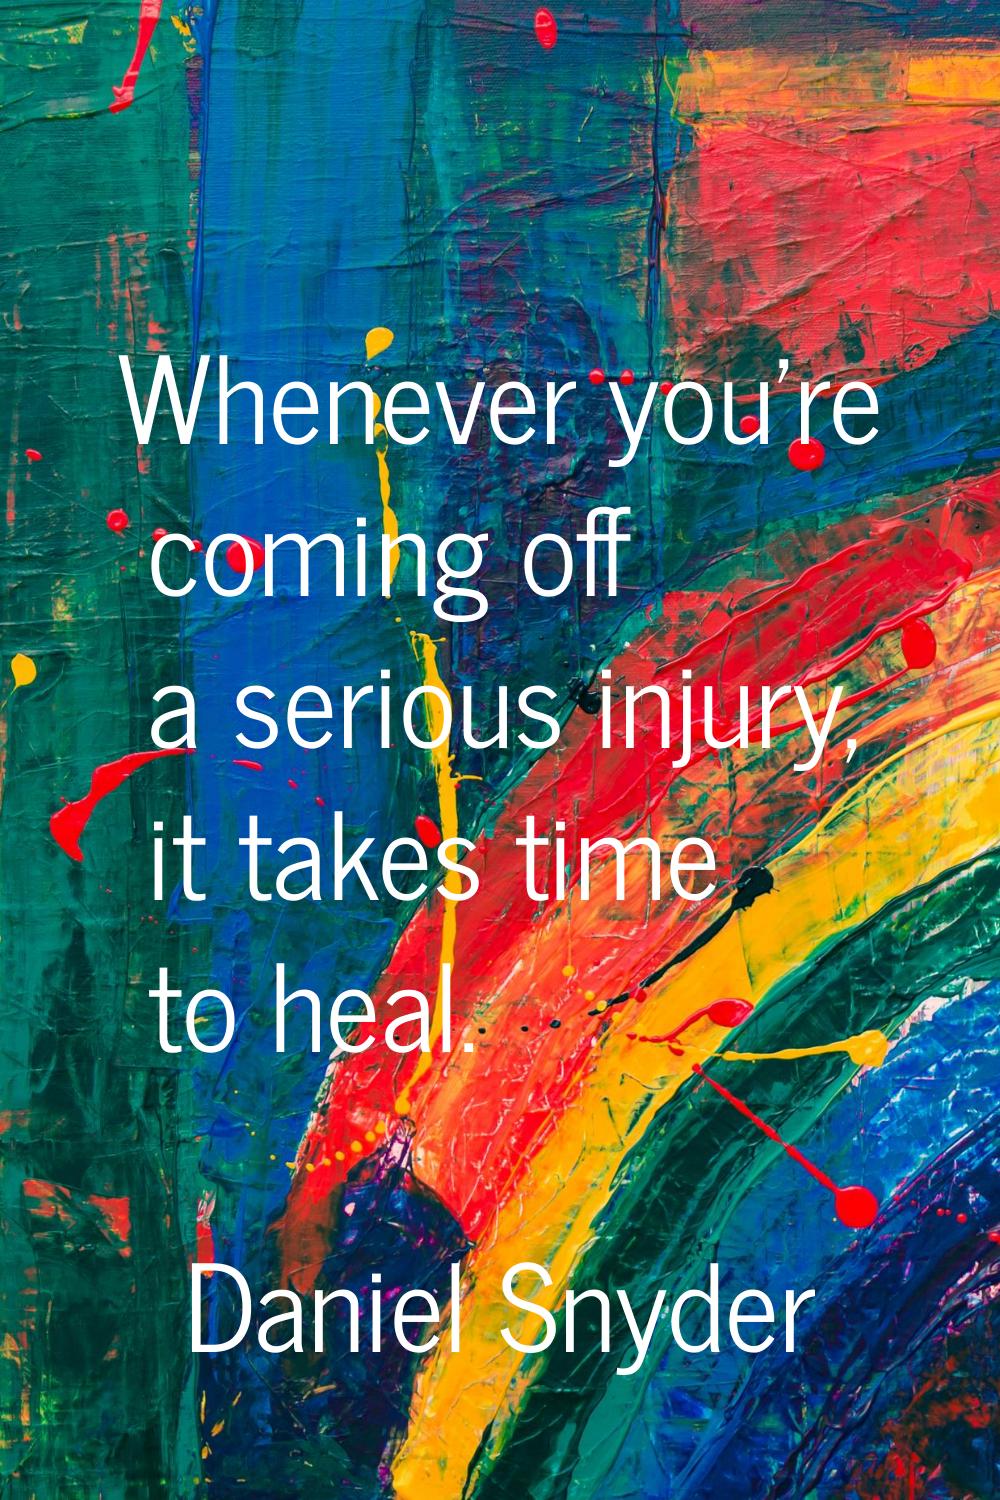 Whenever you're coming off a serious injury, it takes time to heal.